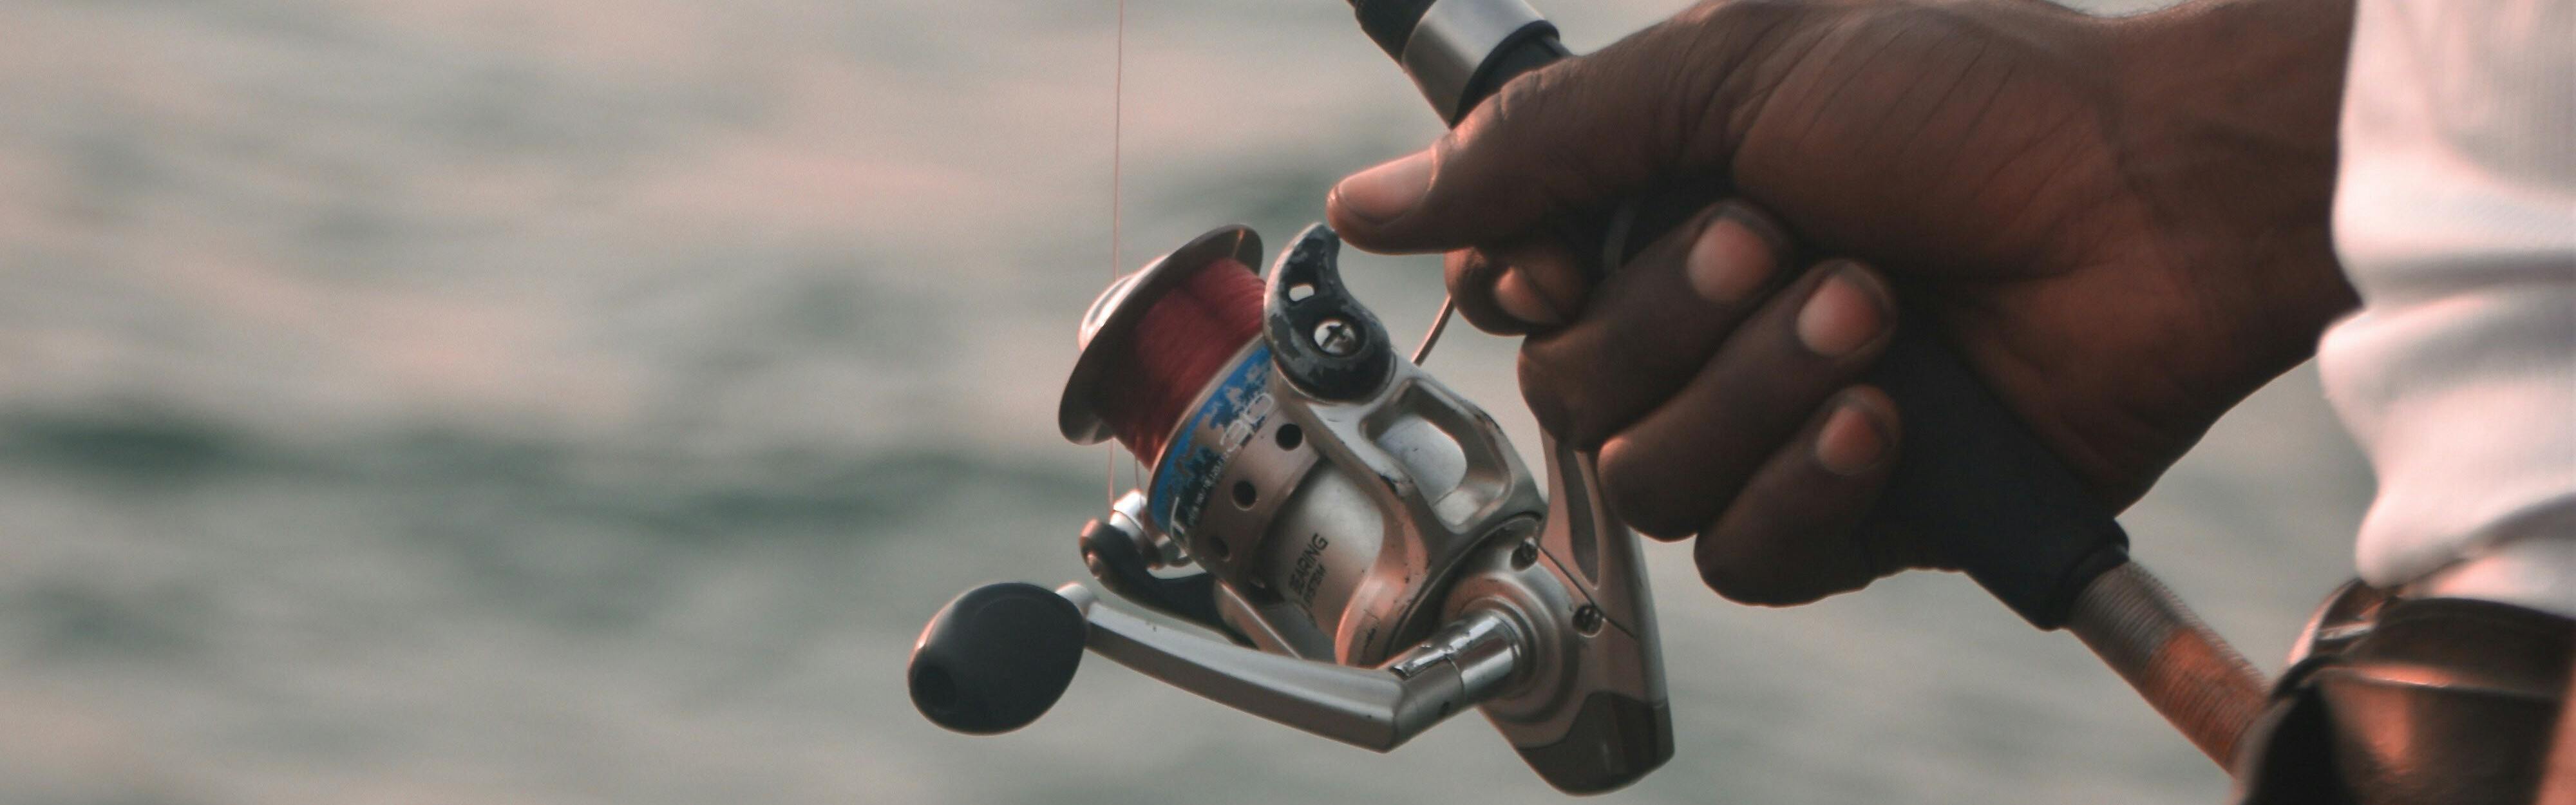 Fishing Rod and Reel Combos: How to Choose the Best One for You